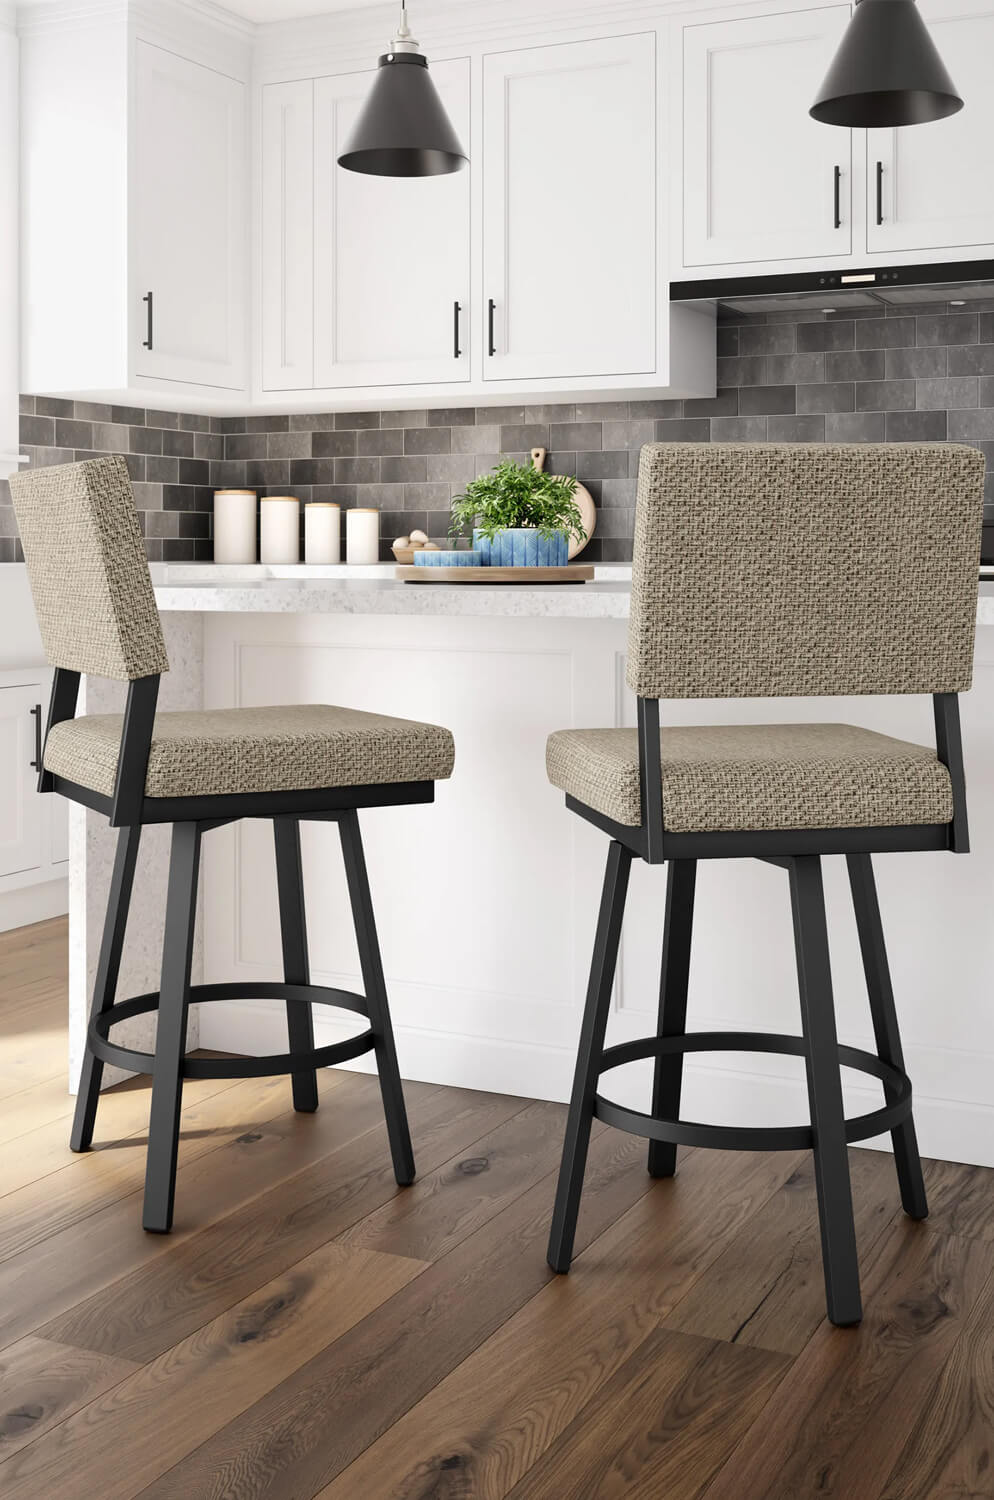 Amisco's Mathilde Black and Brown Swivel Bar Stool in White Kitchen